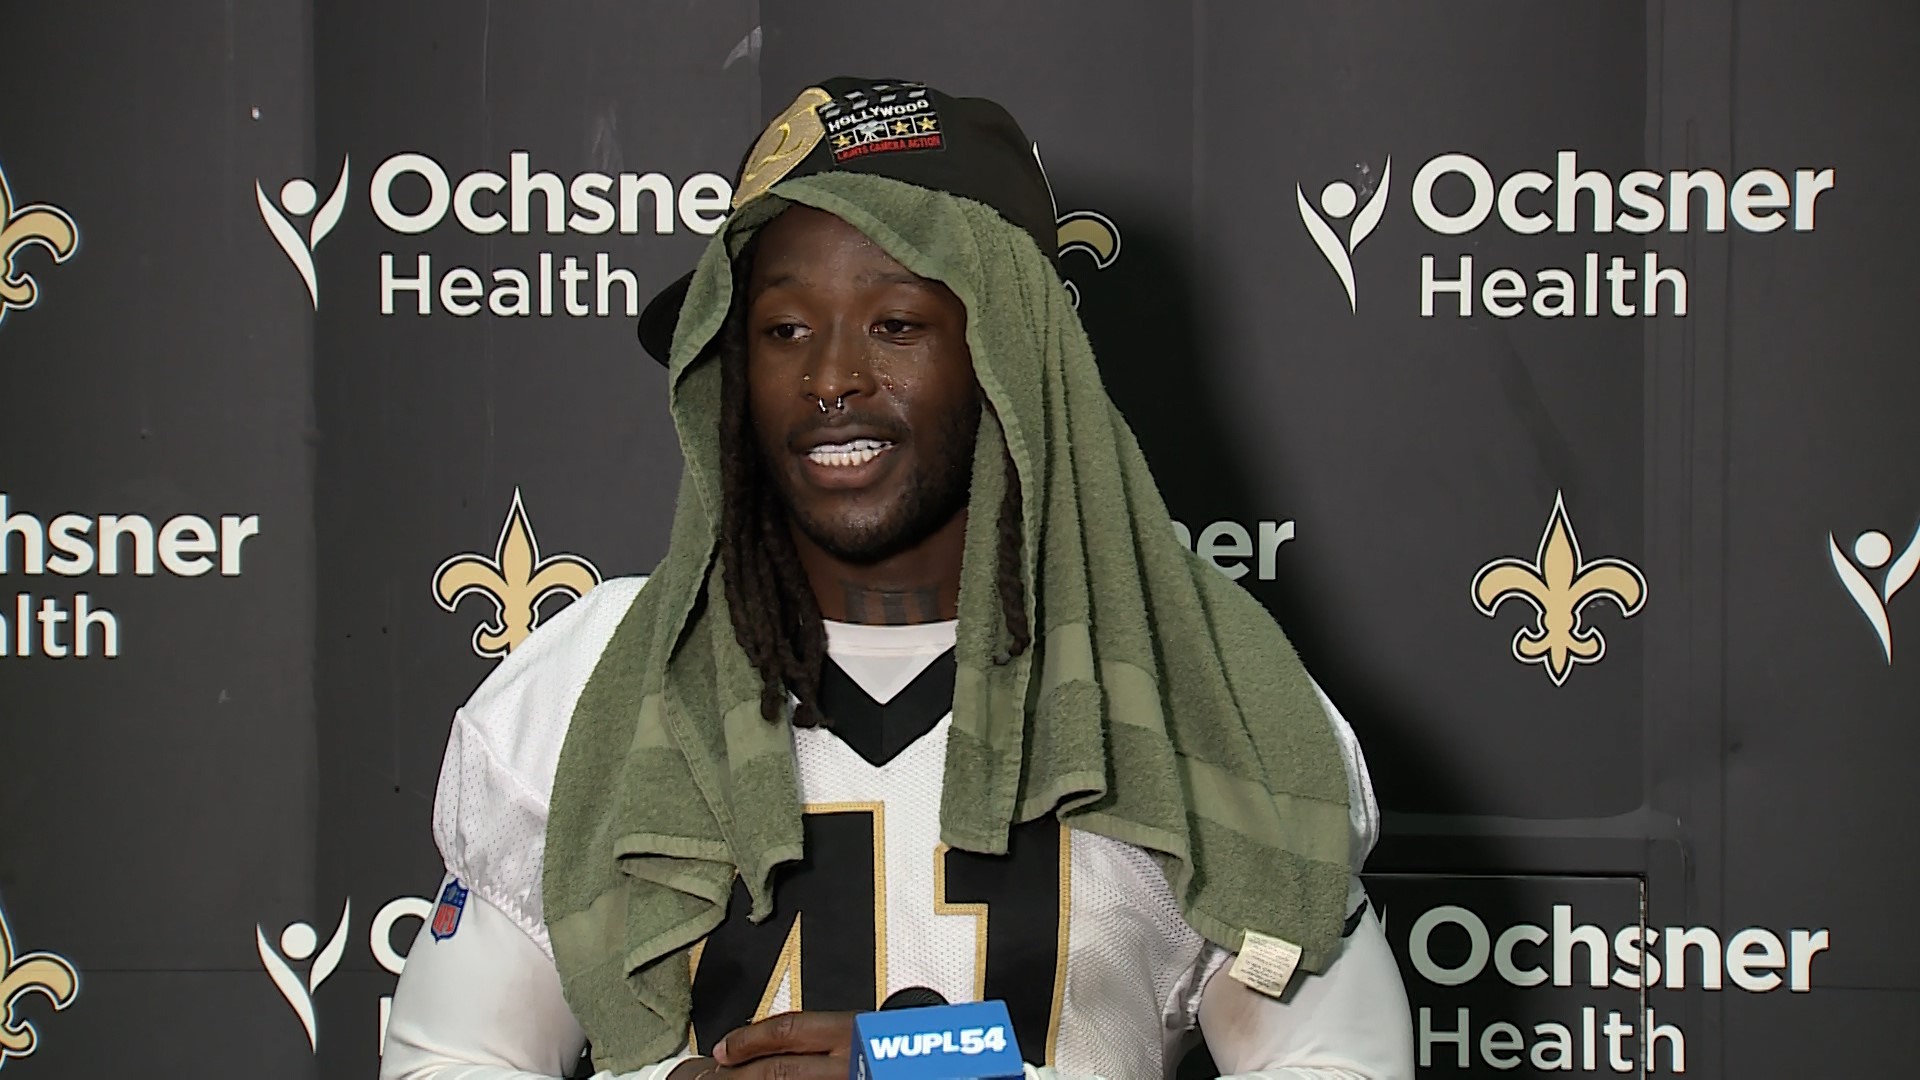 Two days after meeting with NFL Commissioner Roger Goodell, Saints star Alvin Kamara spoke with media afterward about the infamous Las Vegas nightclub incident.